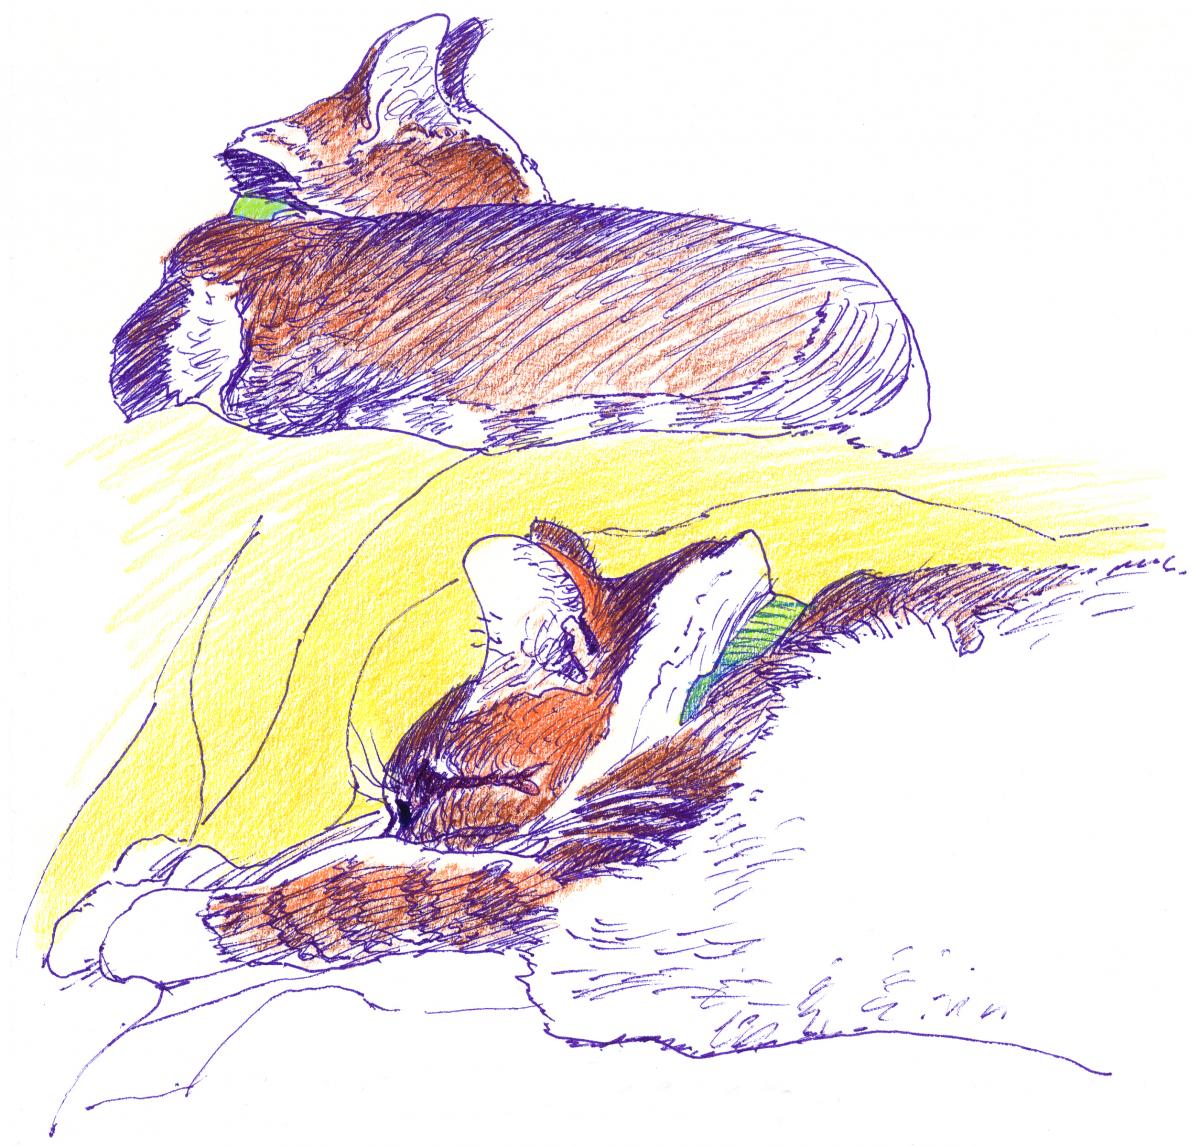 Feline Lie-In - color drawing of cats by Frank Costantino